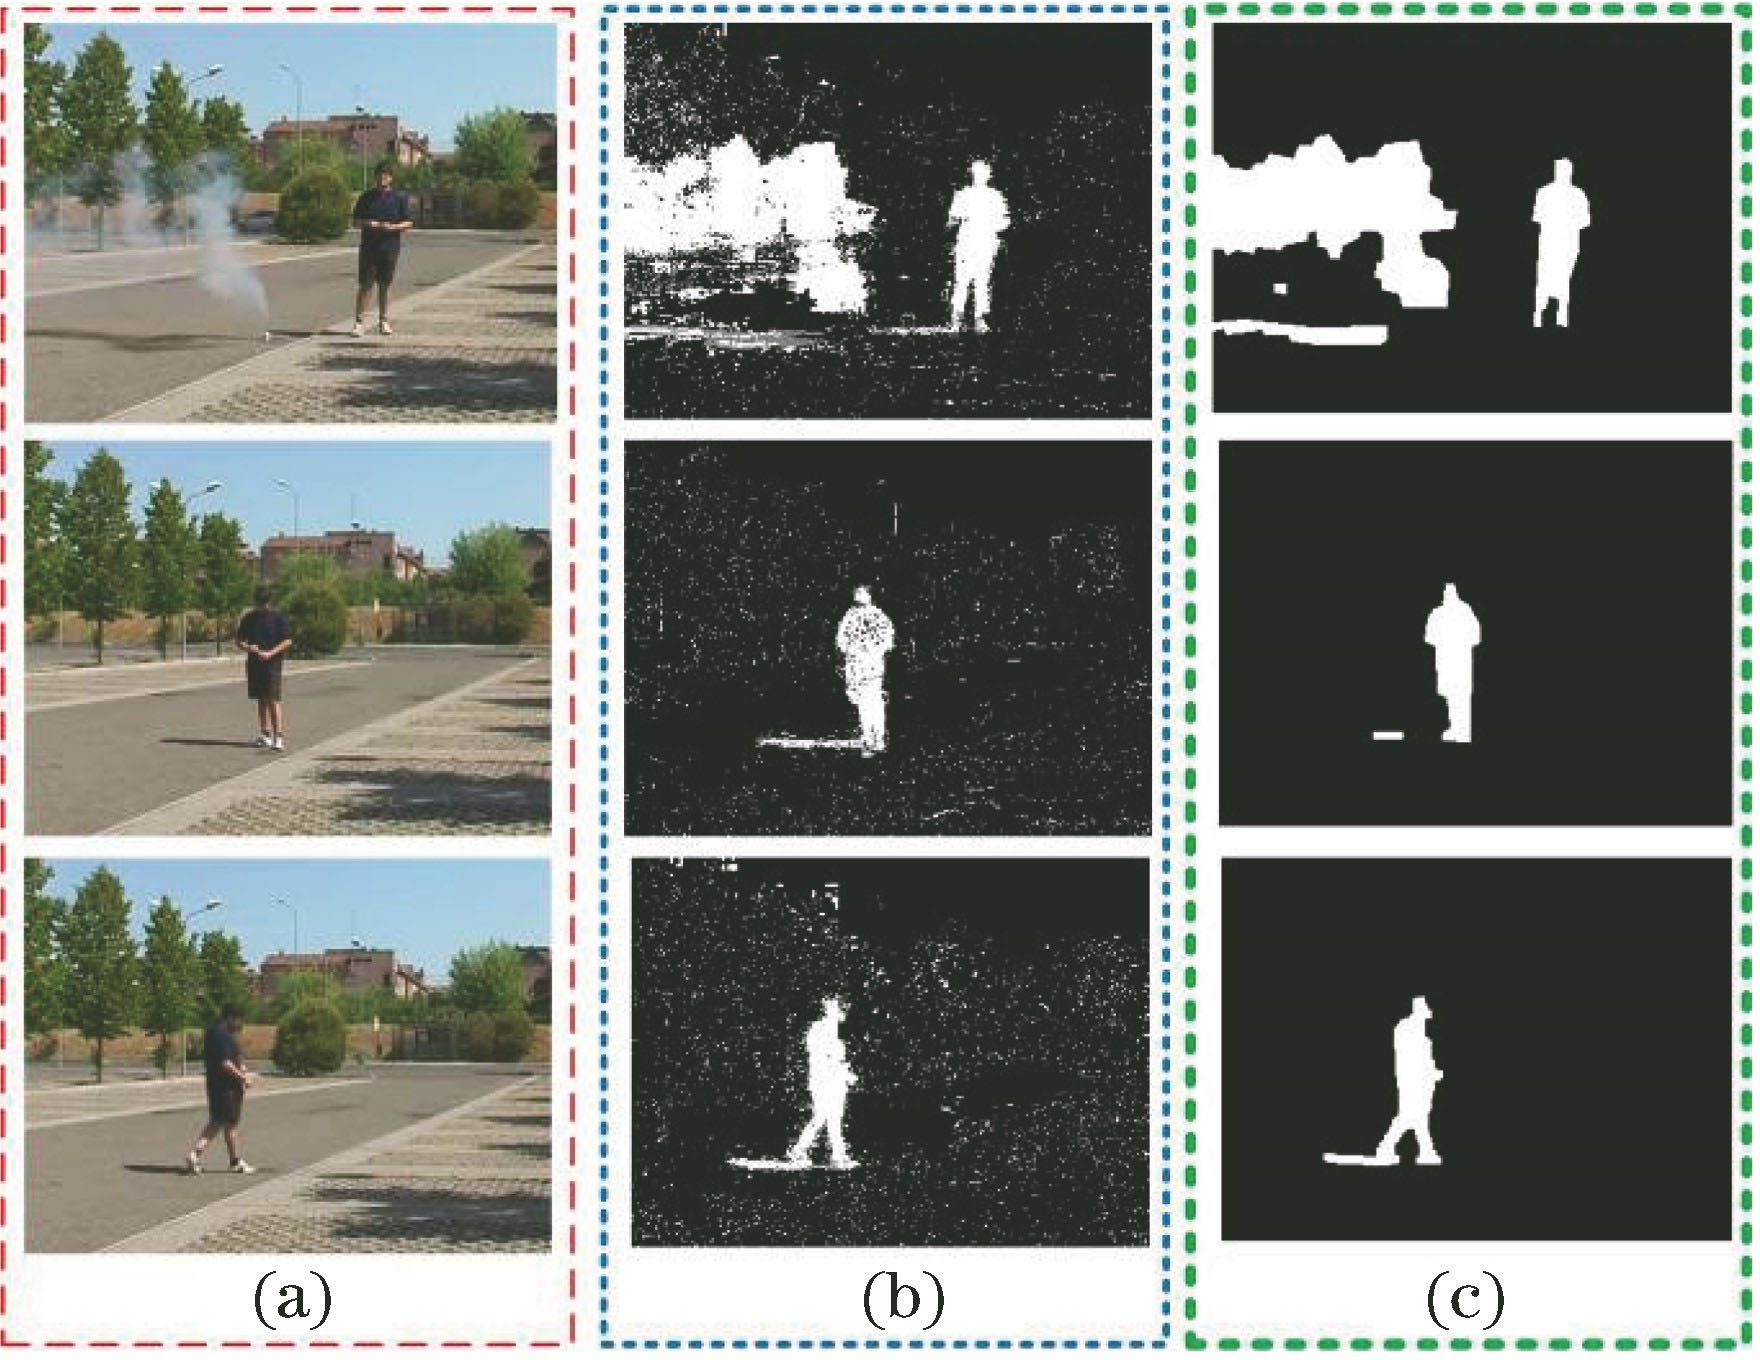 Motion object detection. (a) Original images; (b) process results based on GMM; (c) process results based on morphology